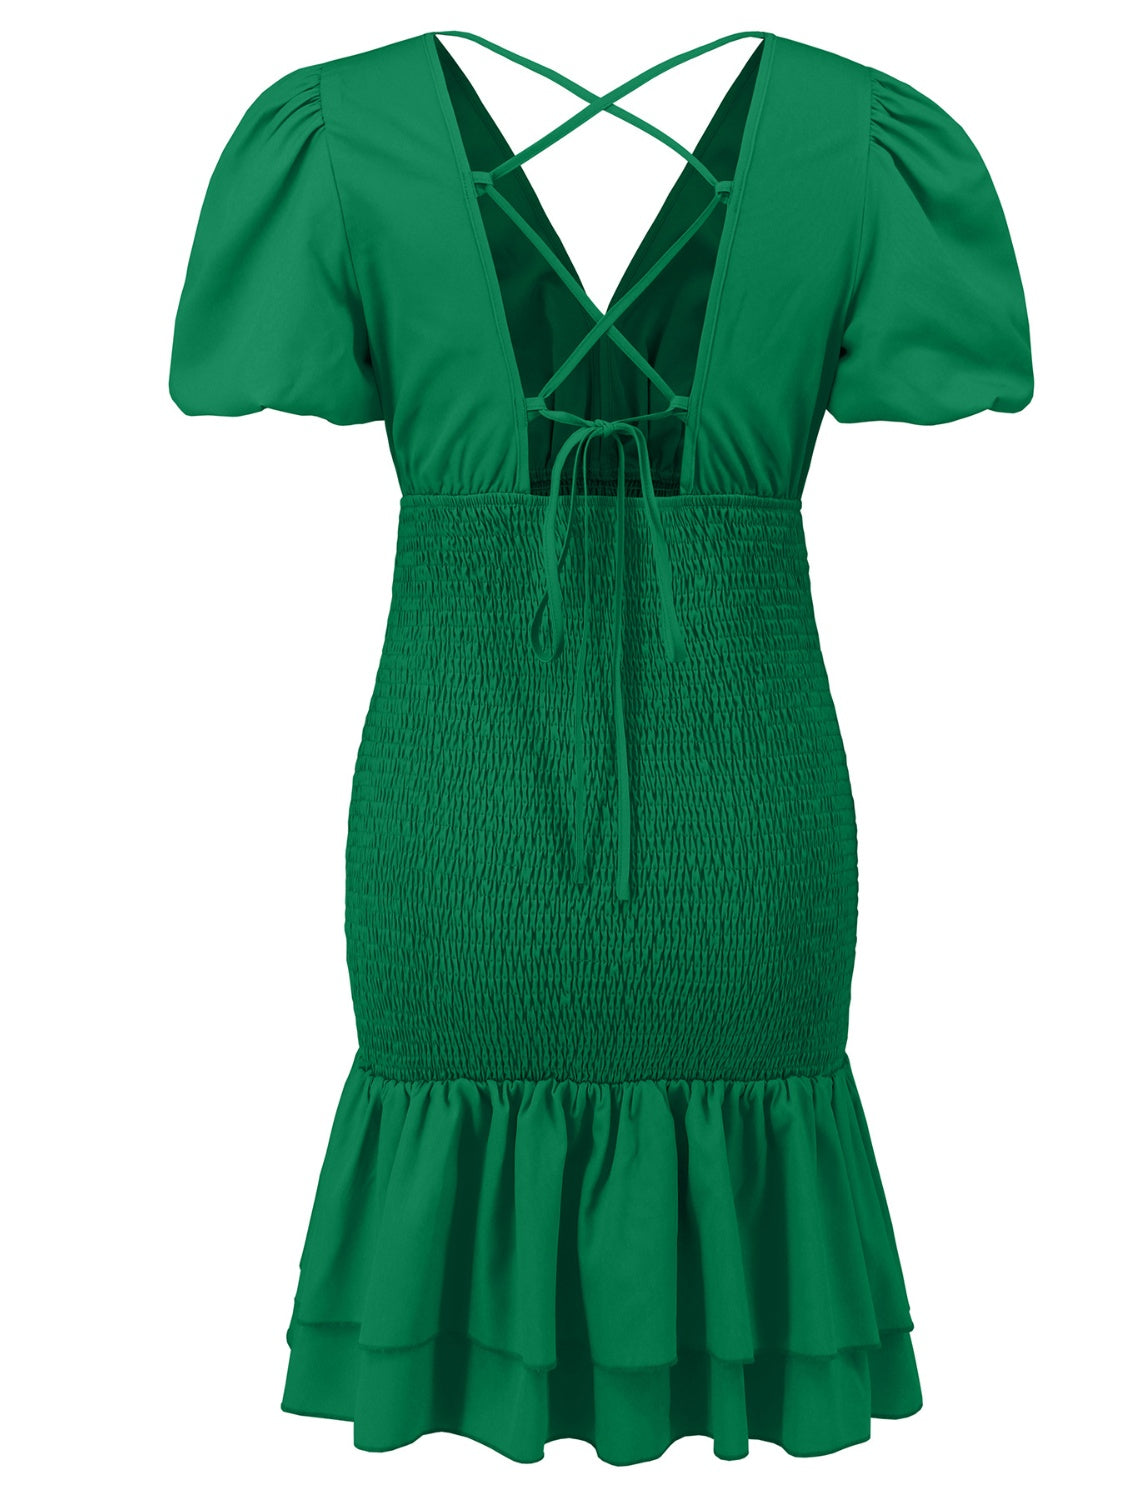 Never Gonna Give Up Smocked Ruffle Dress